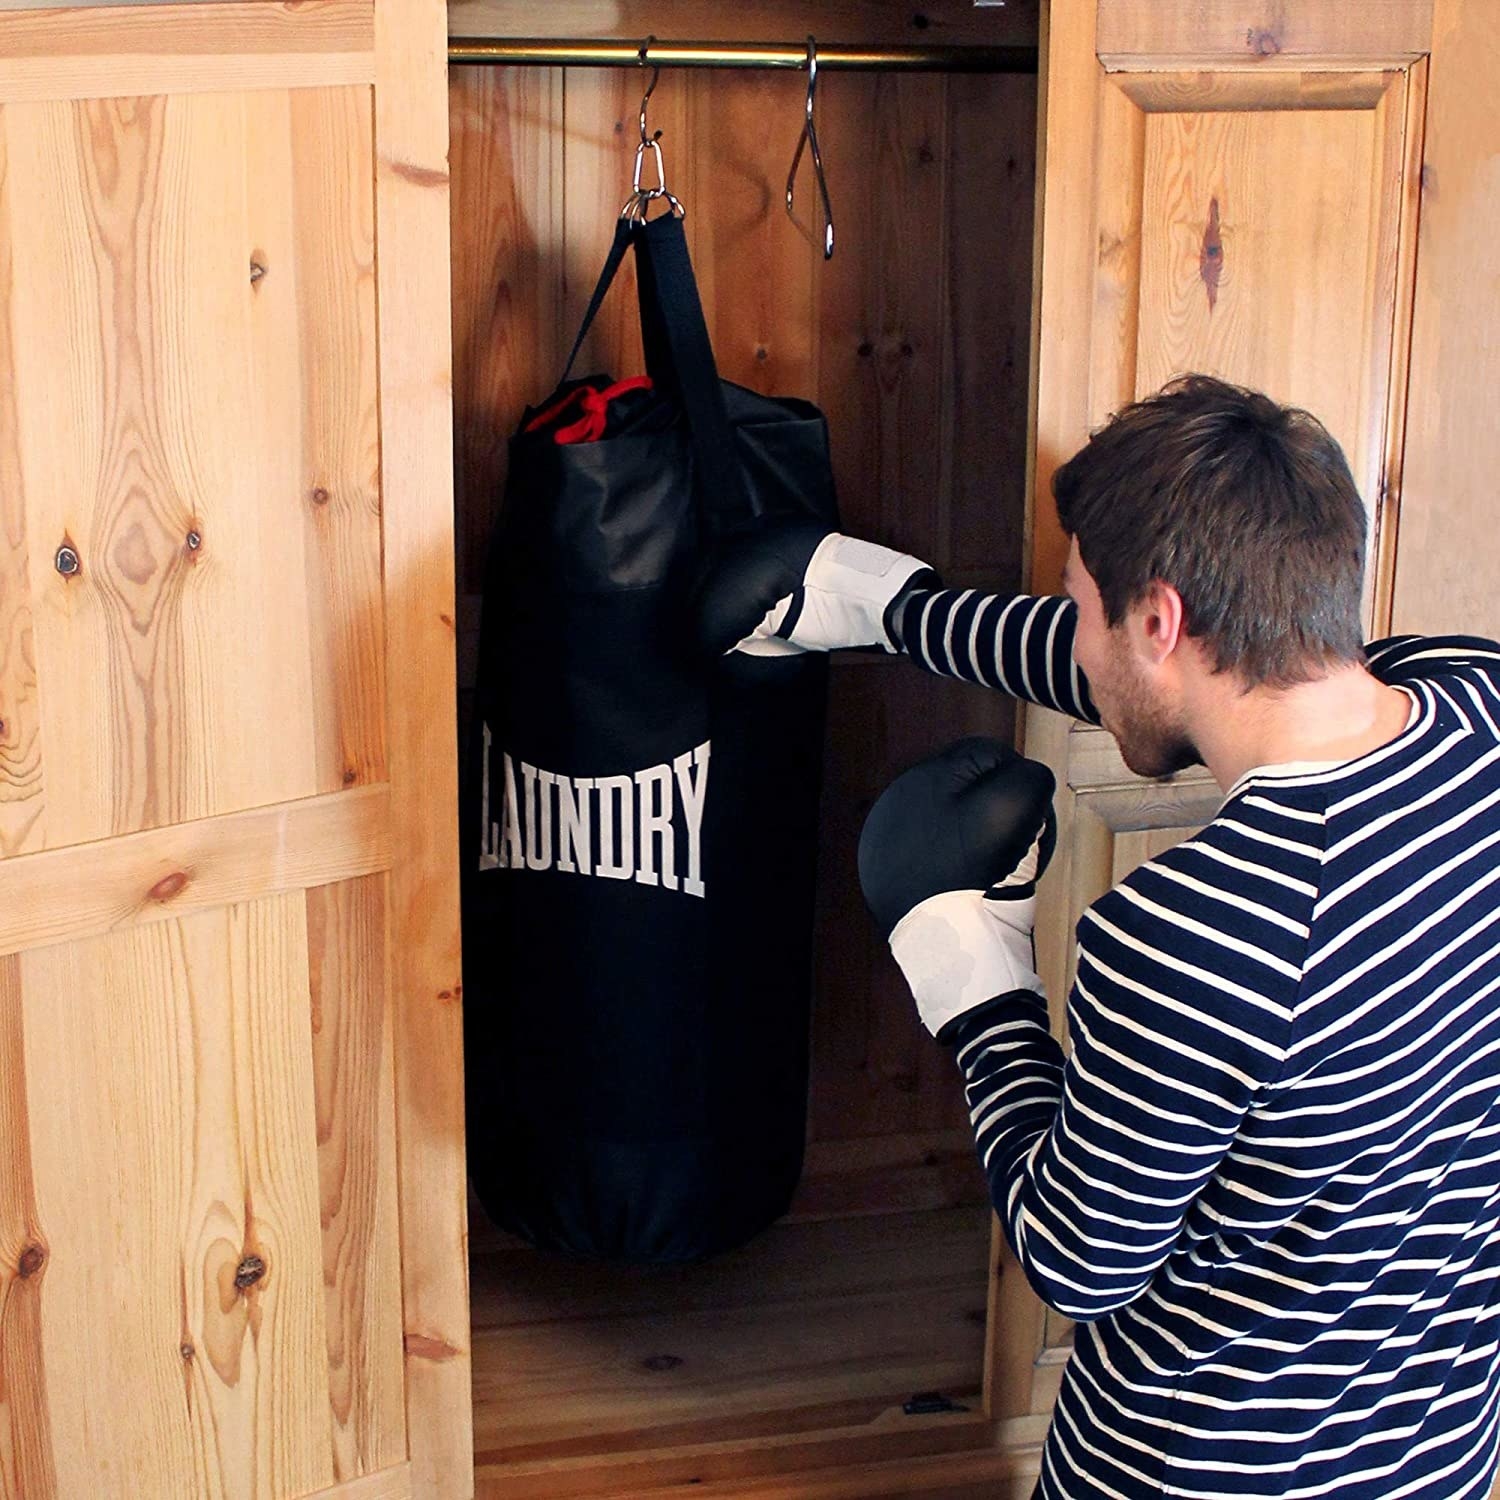 A person punching the filled bag